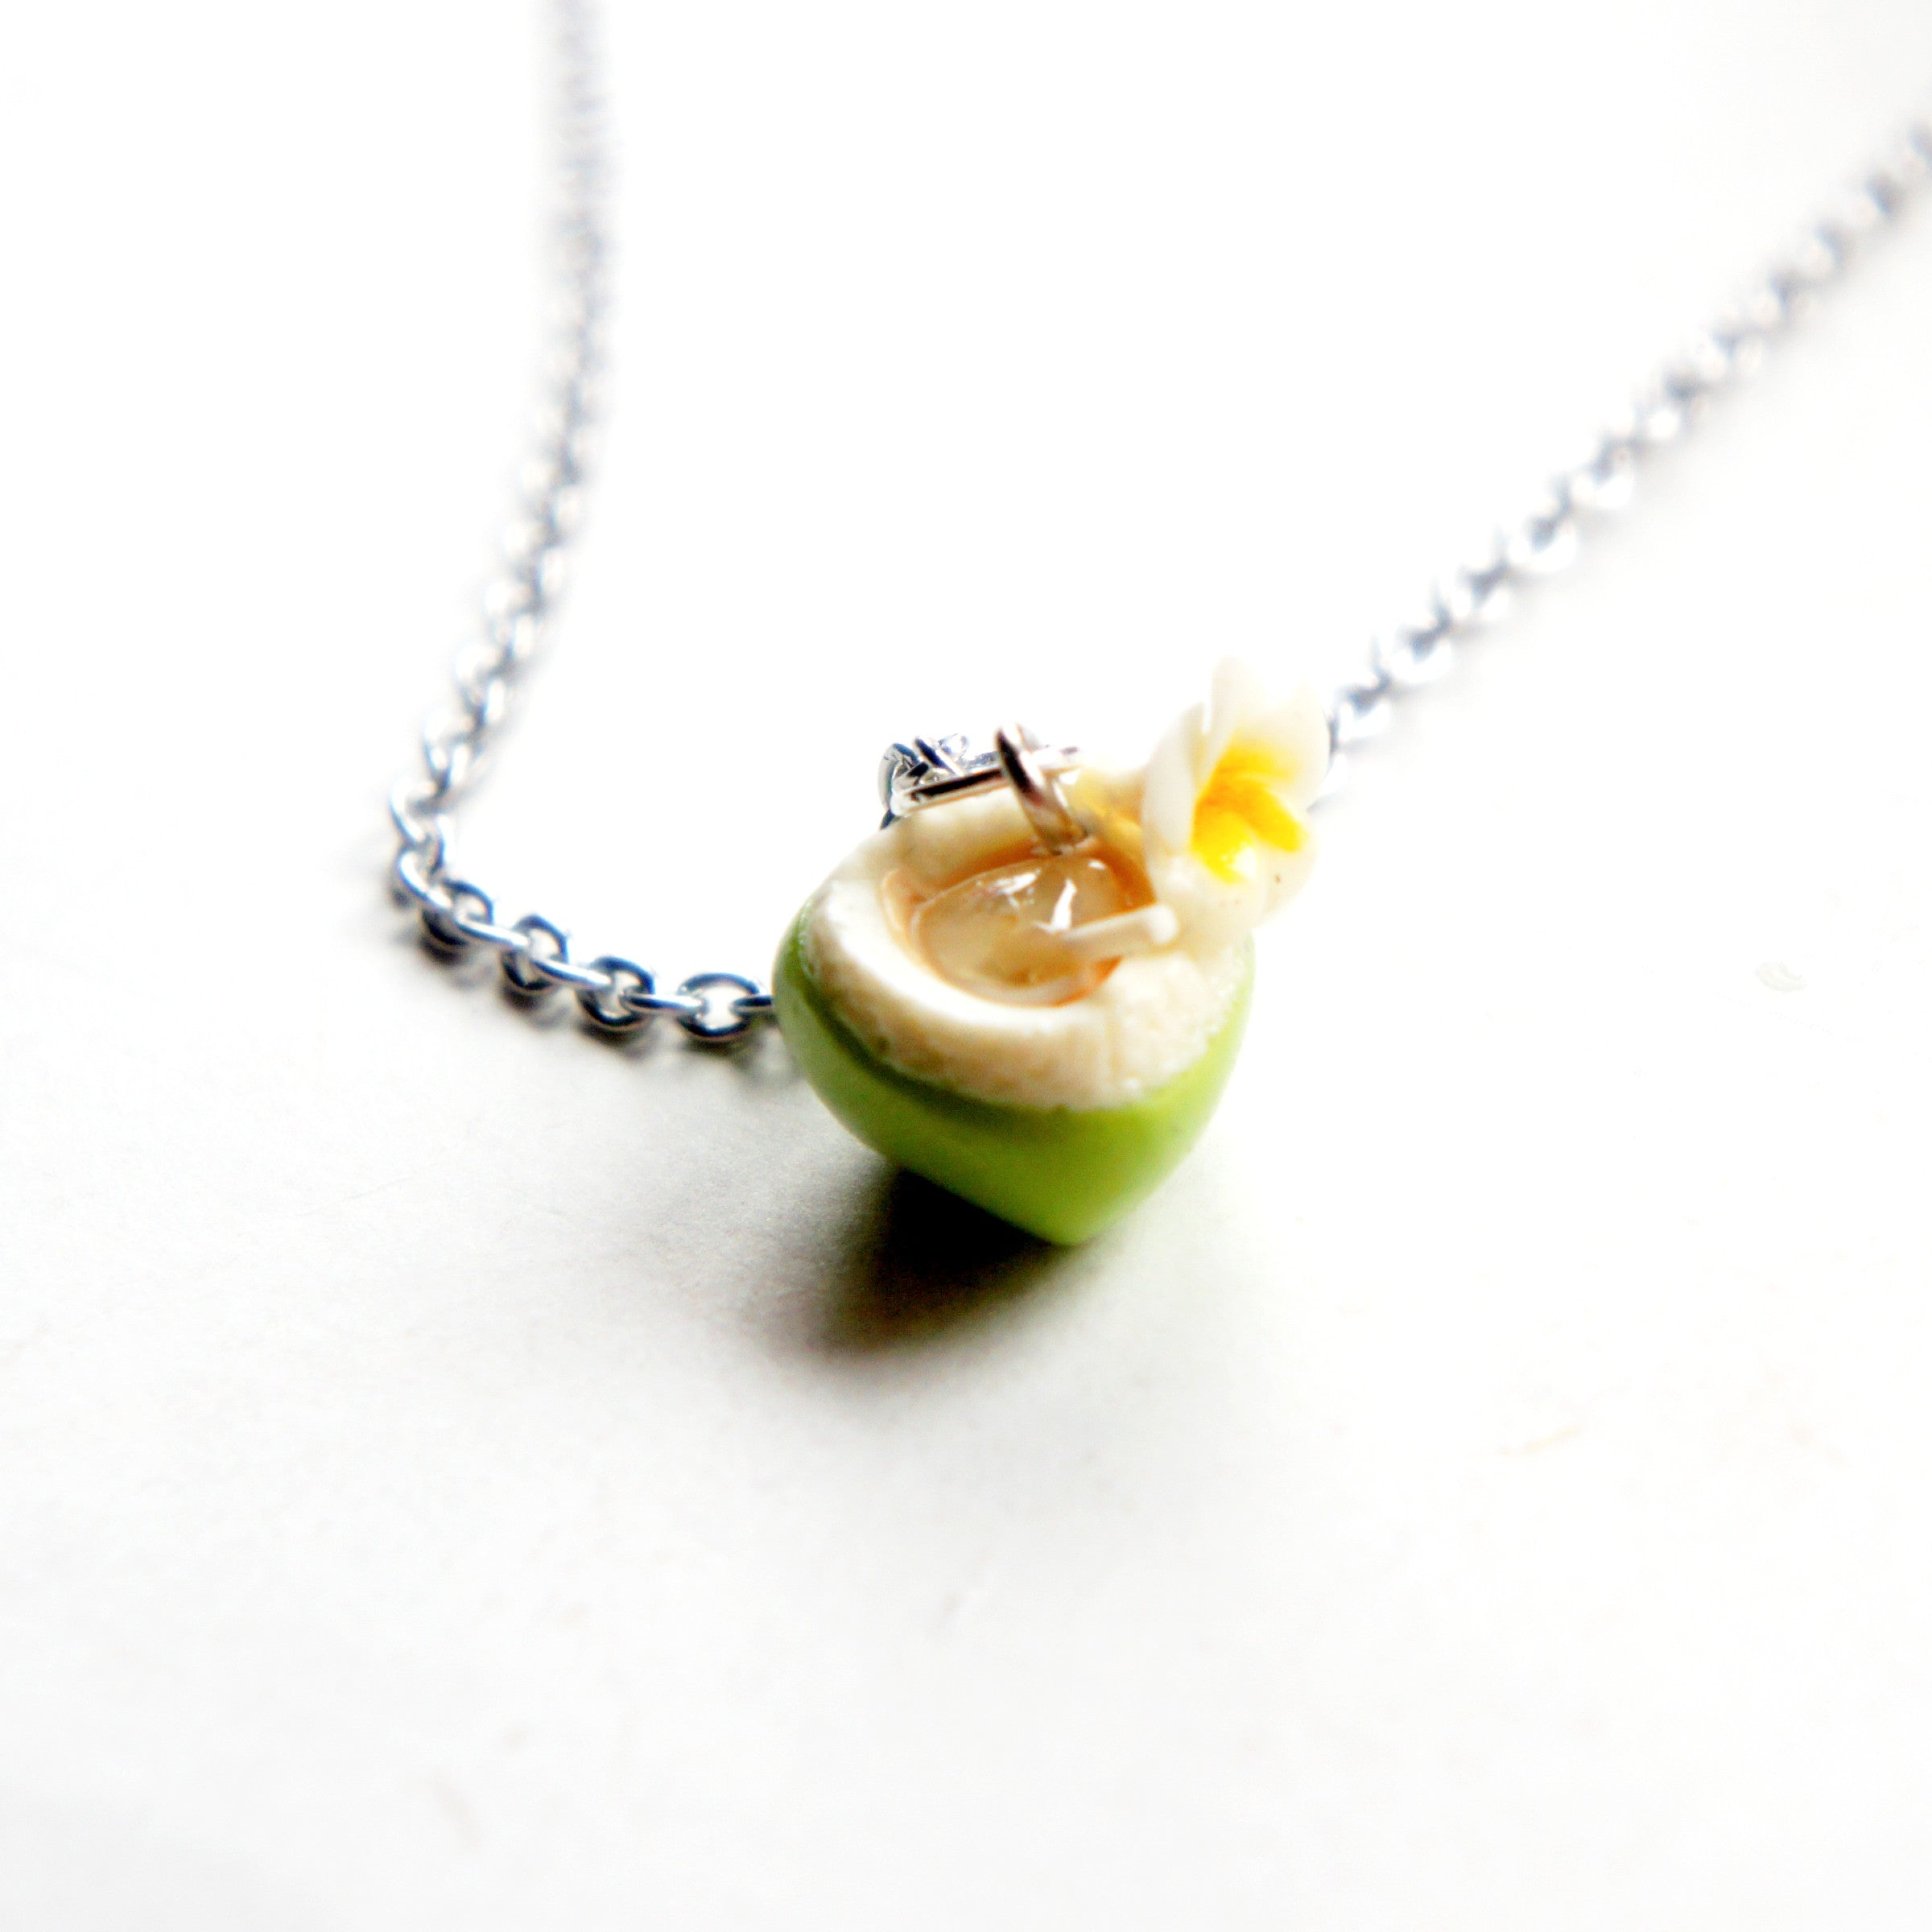 Coconut Juice Necklace - Jillicious charms and accessories